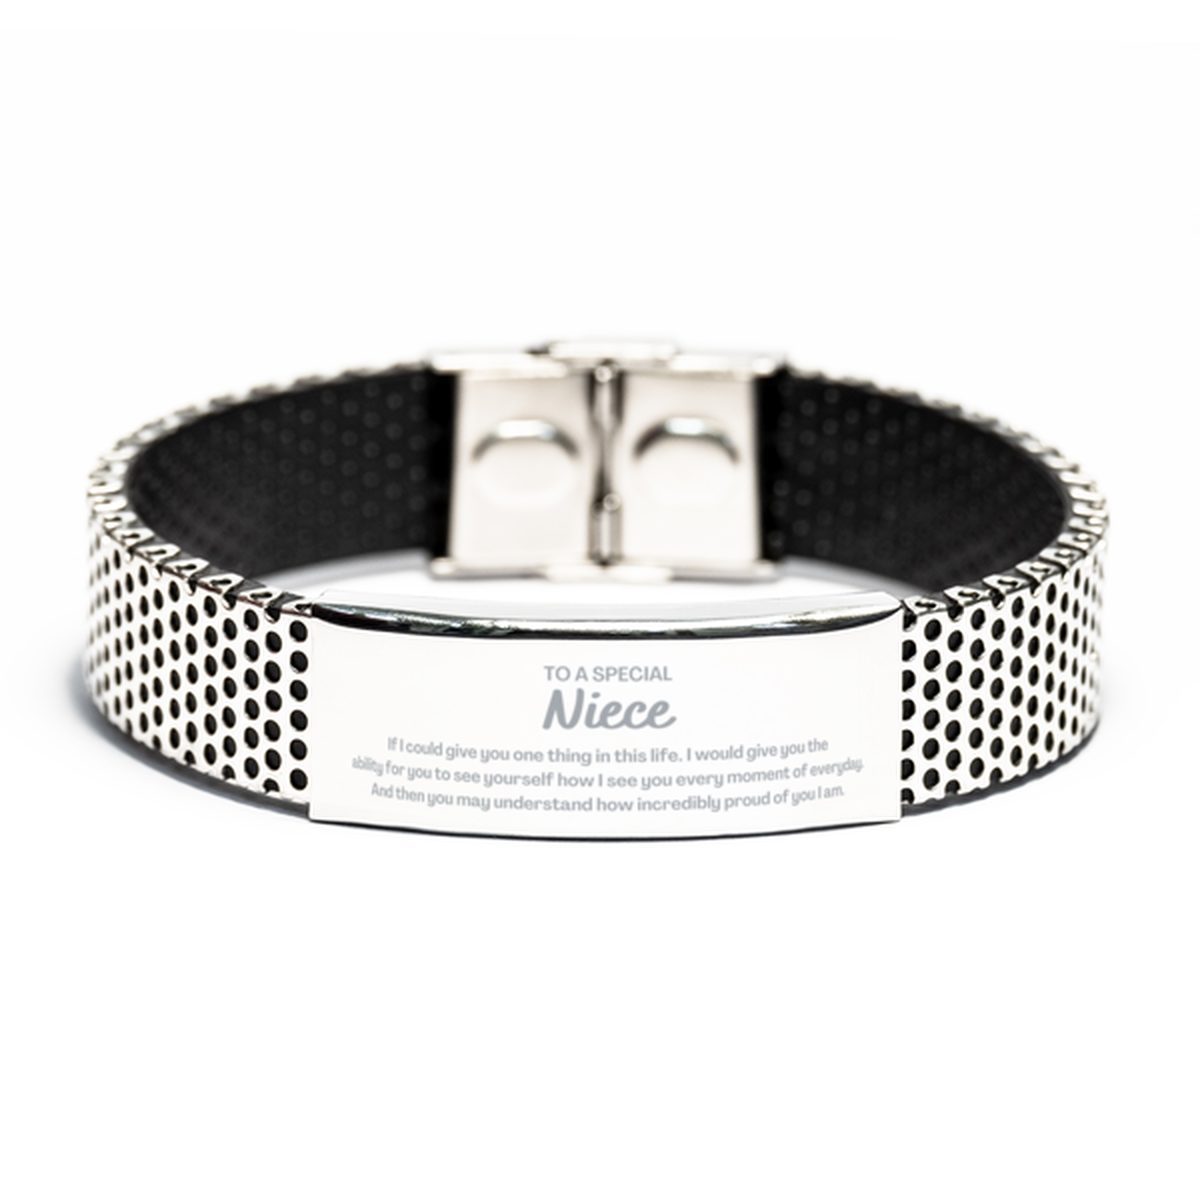 To My Niece Stainless Steel Bracelet, Gifts For Niece Engraved, Inspirational Gifts for Christmas Birthday, Epic Gifts for Niece To A Special Niece how incredibly proud of you I am